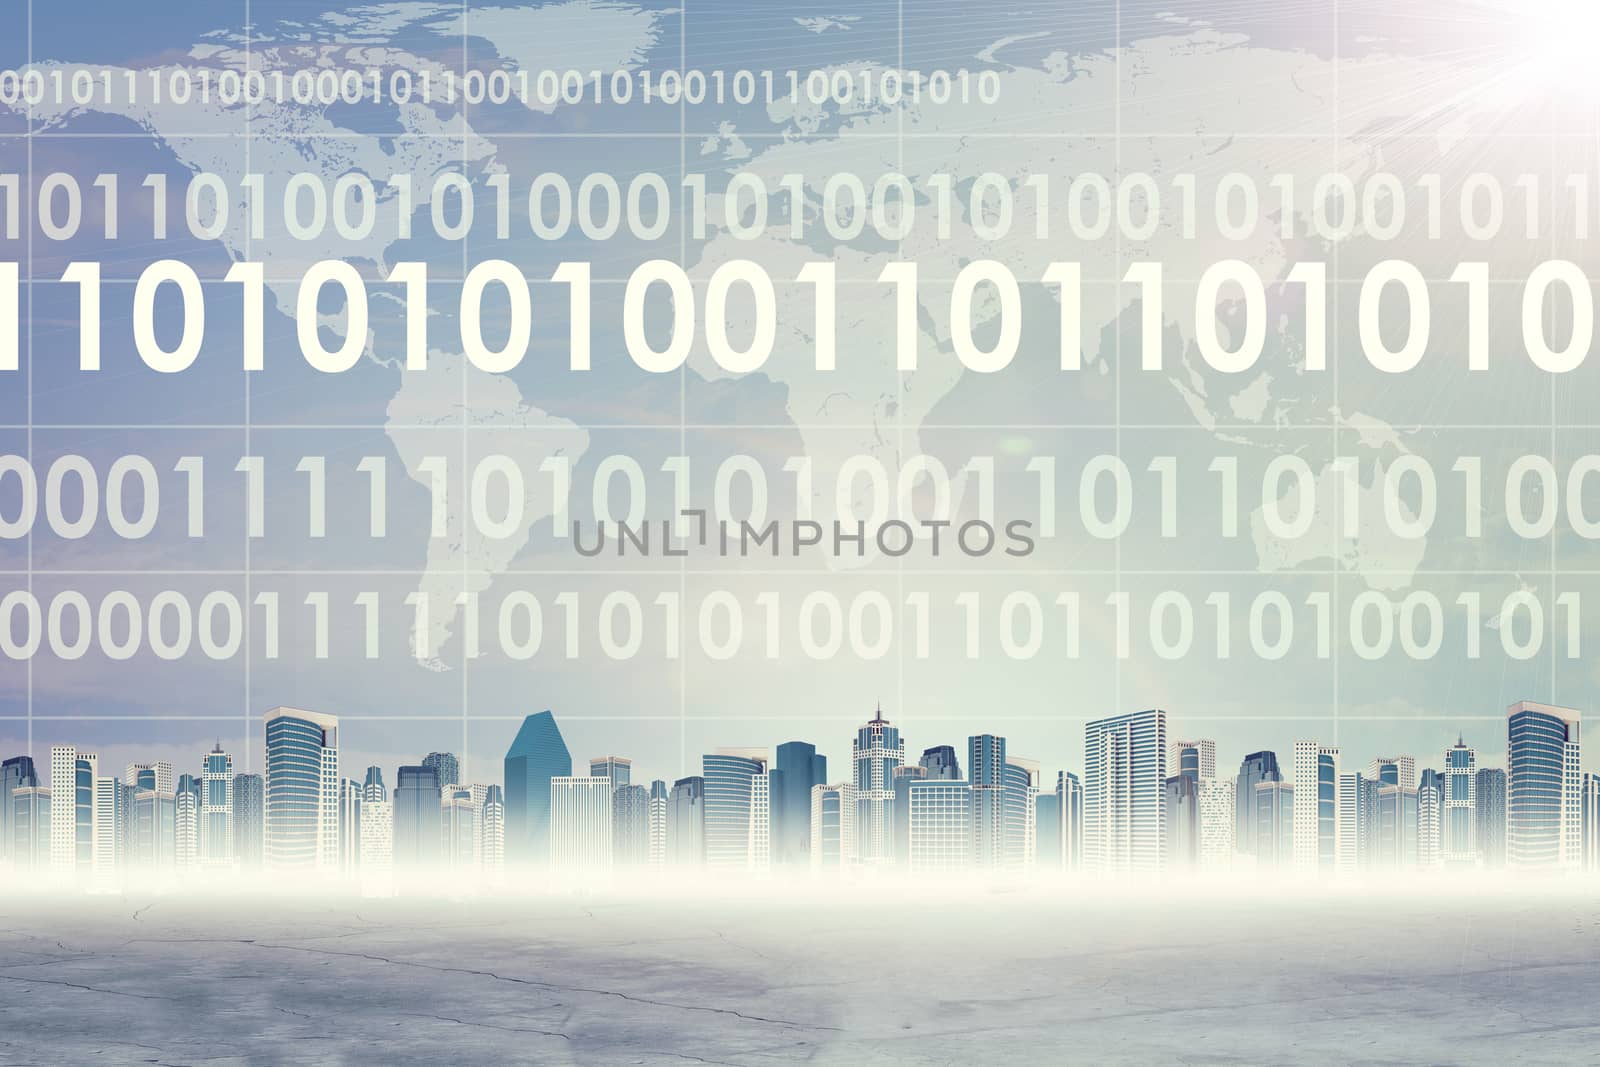 Abstract virtual background with cityscape and numbers